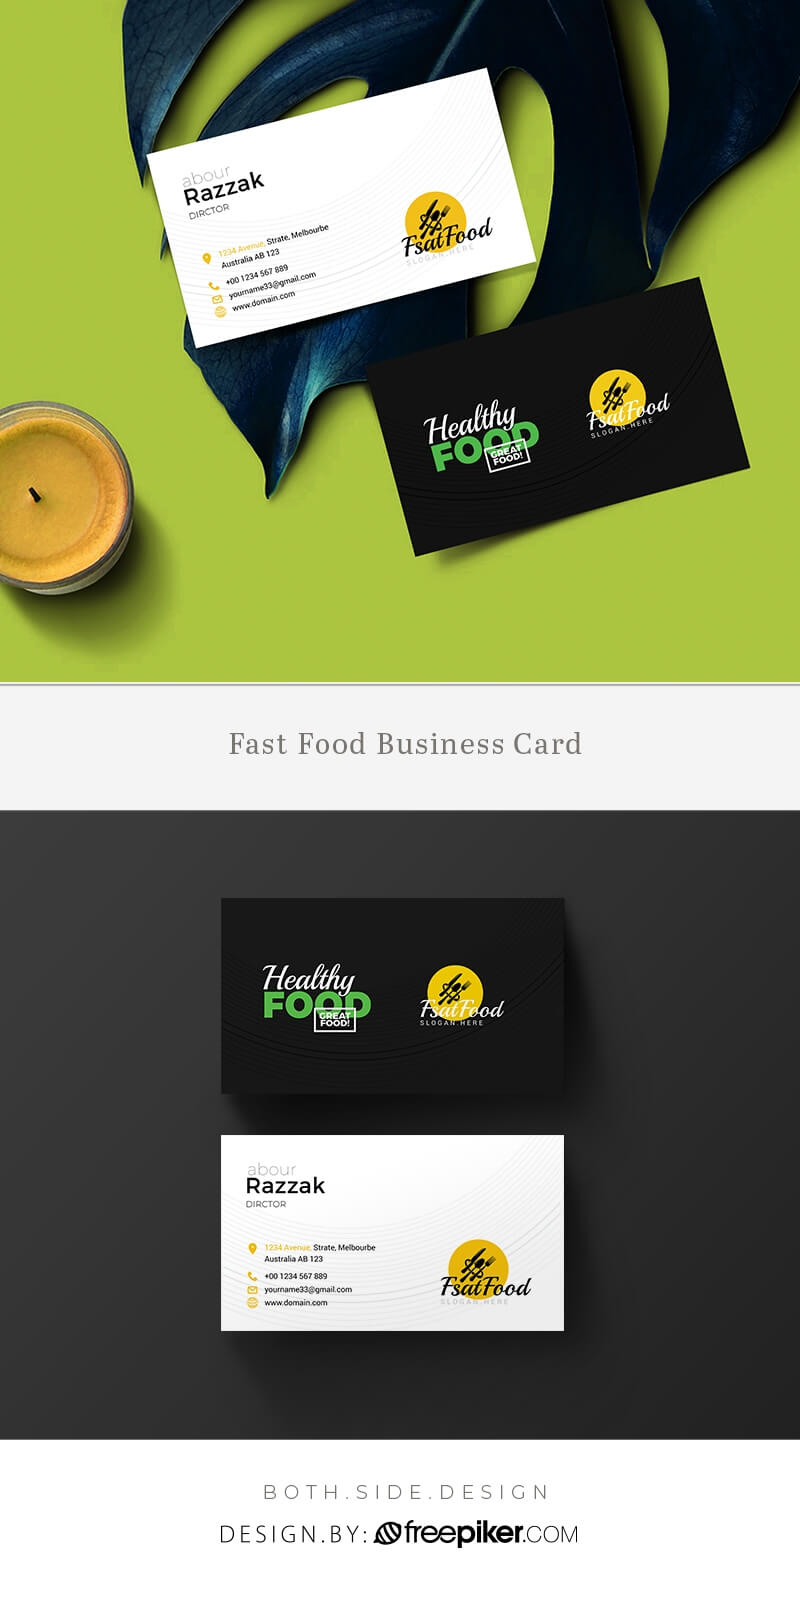 Freepiker | Food And Restaurant Business Card Template Throughout Restaurant Business Cards Templates Free